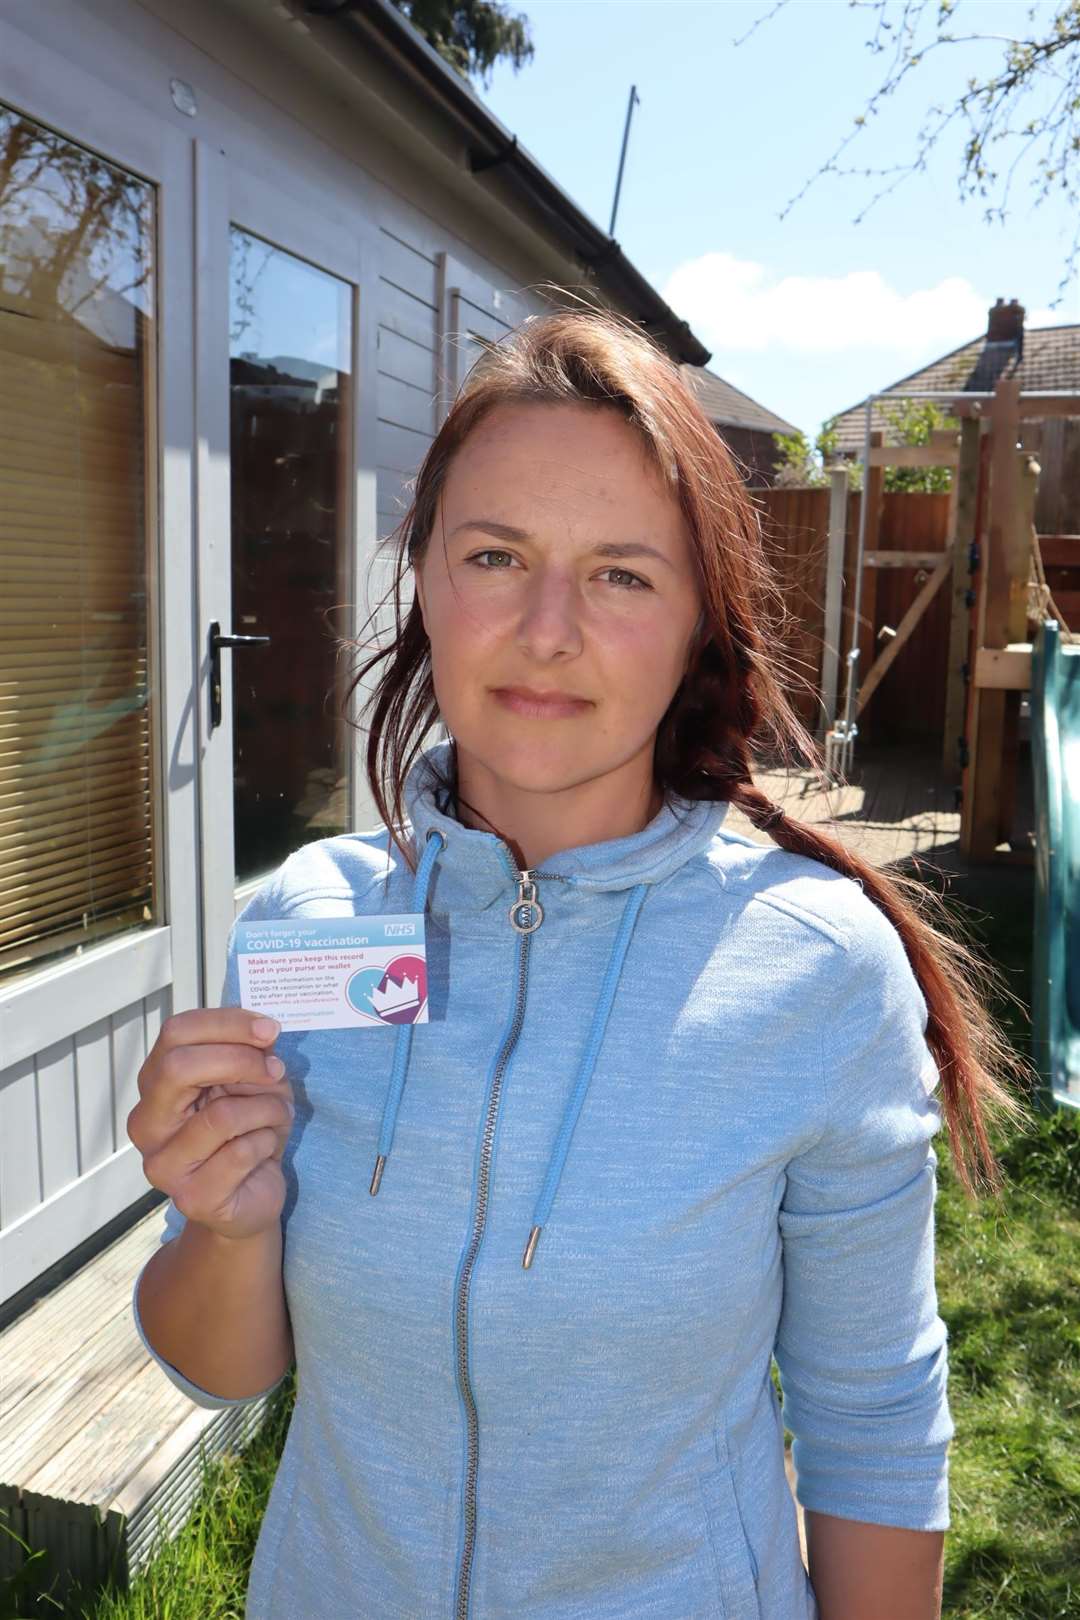 Worrying: Mum of two Nikki Webster has been fighting for her first Covid jab